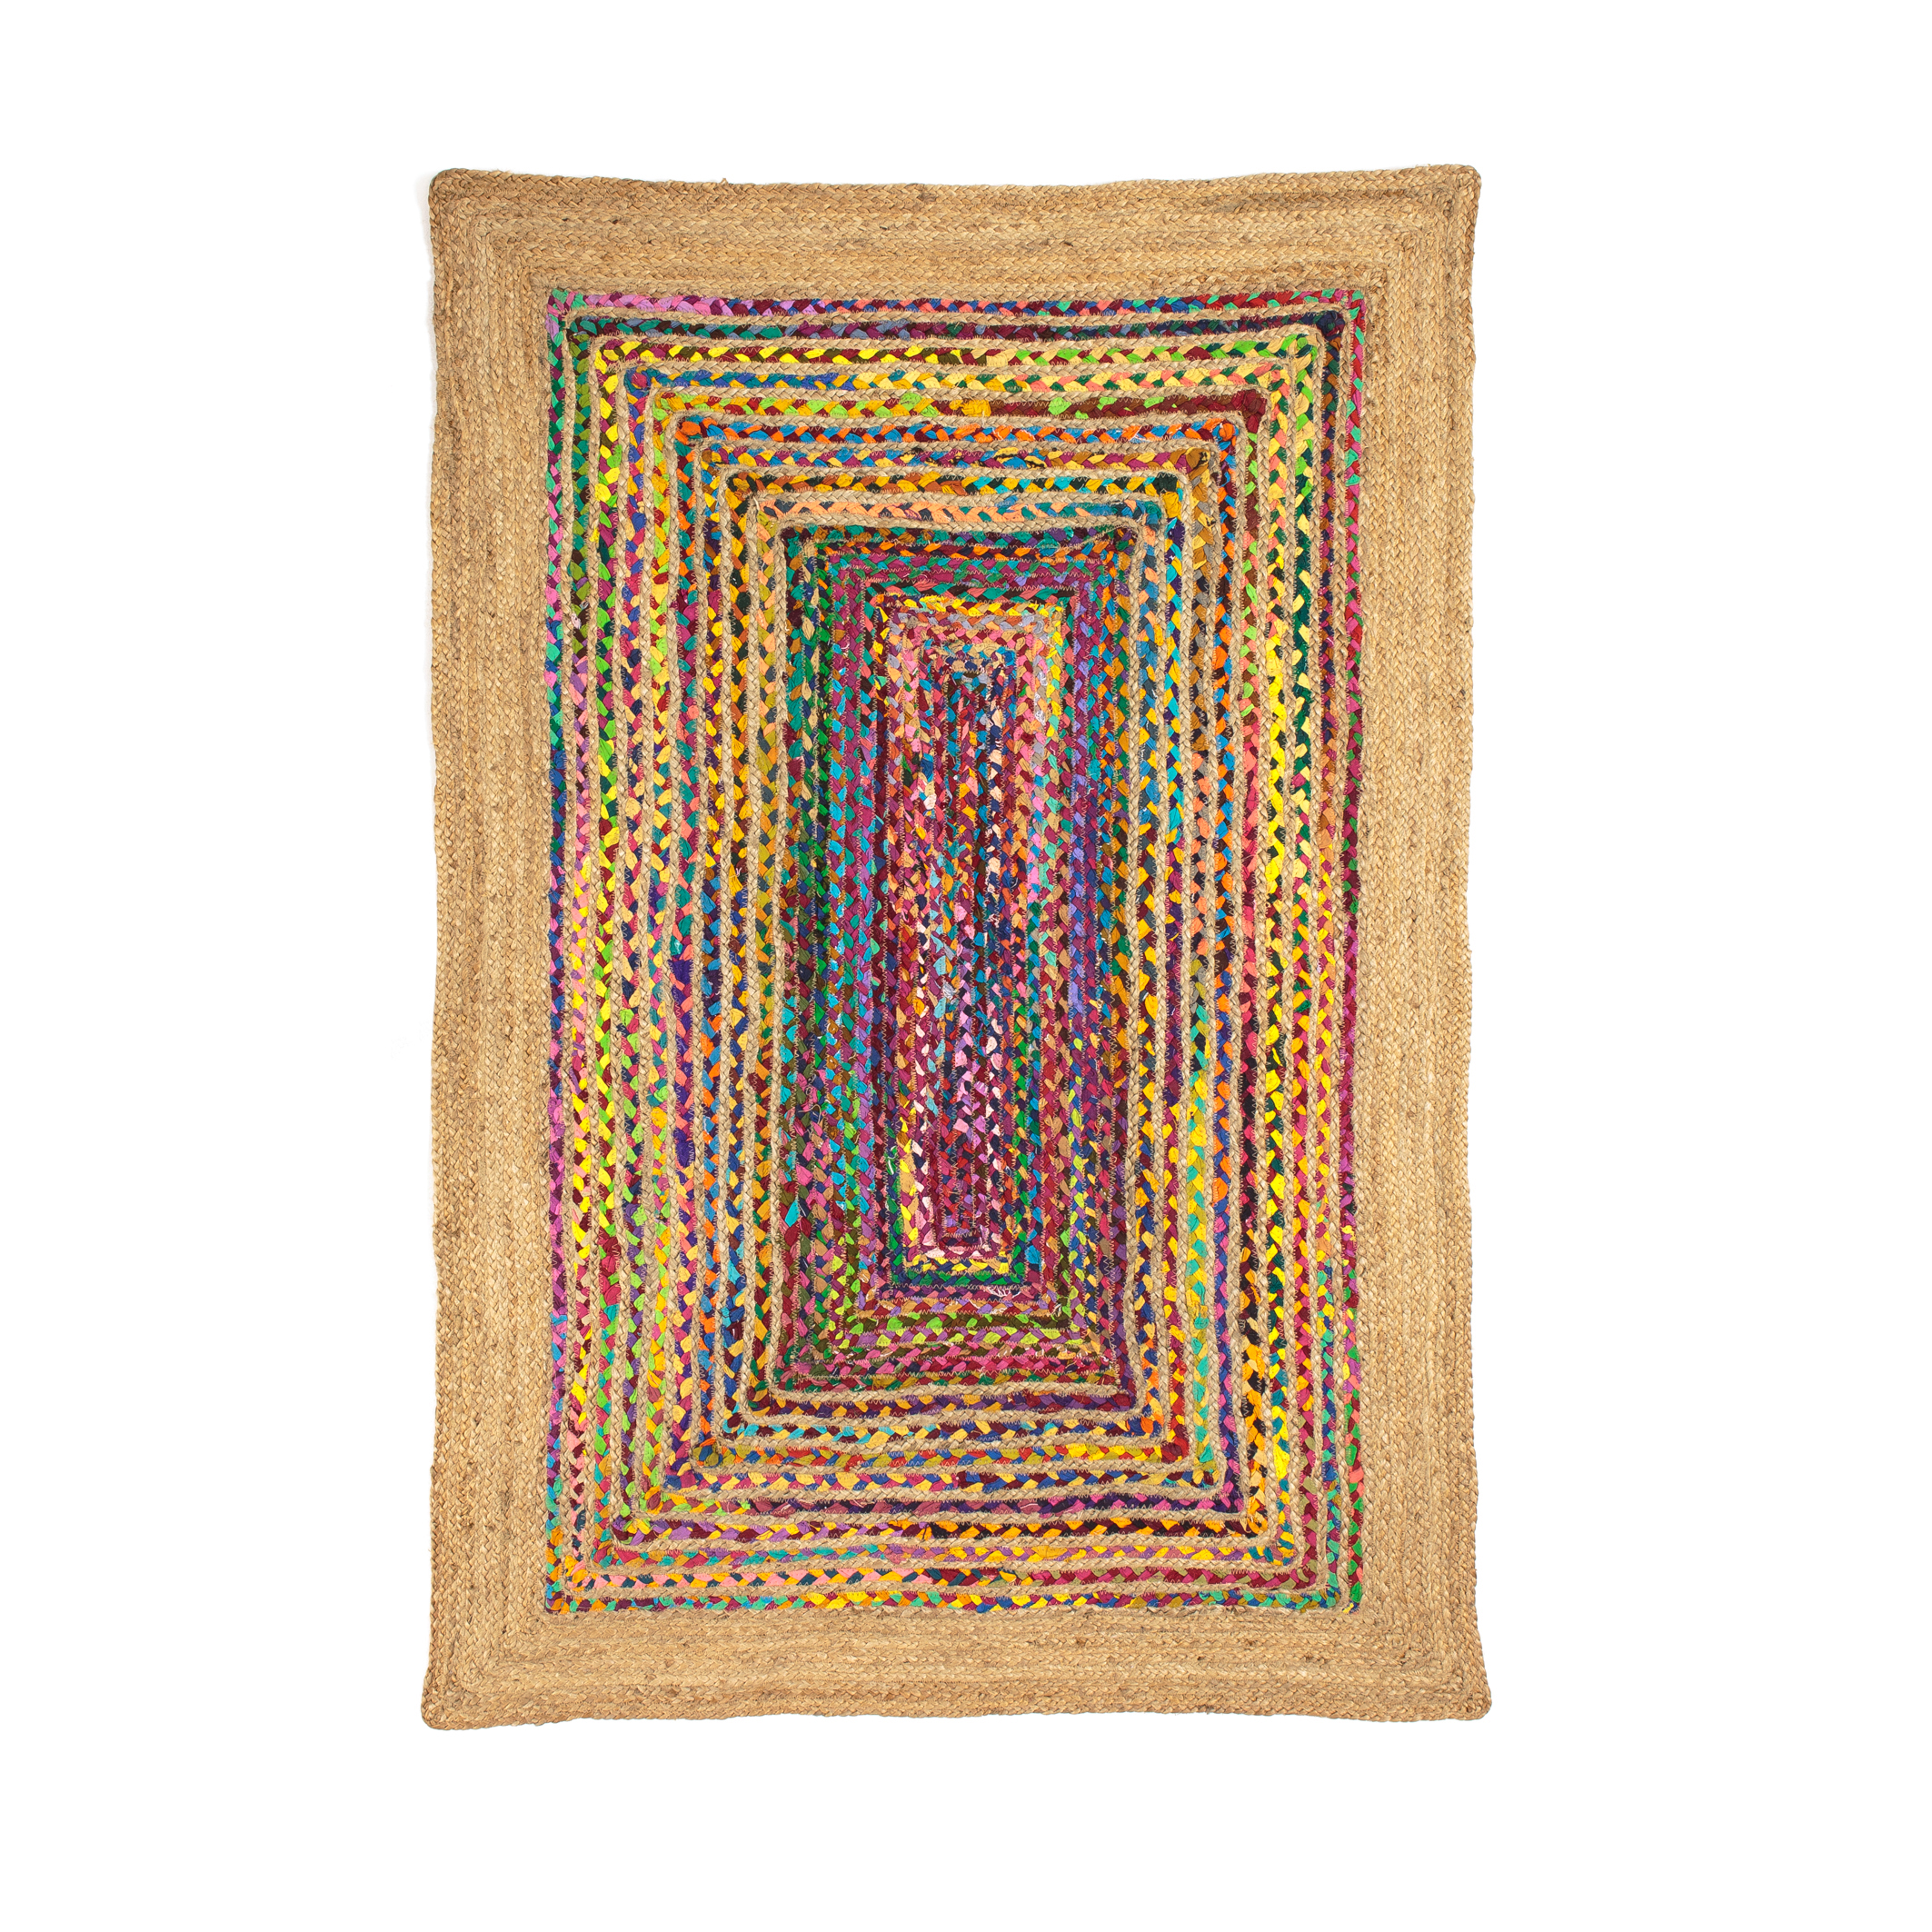 Jaco Rug With Jute And Multicolour, Jute Rugs 8×10